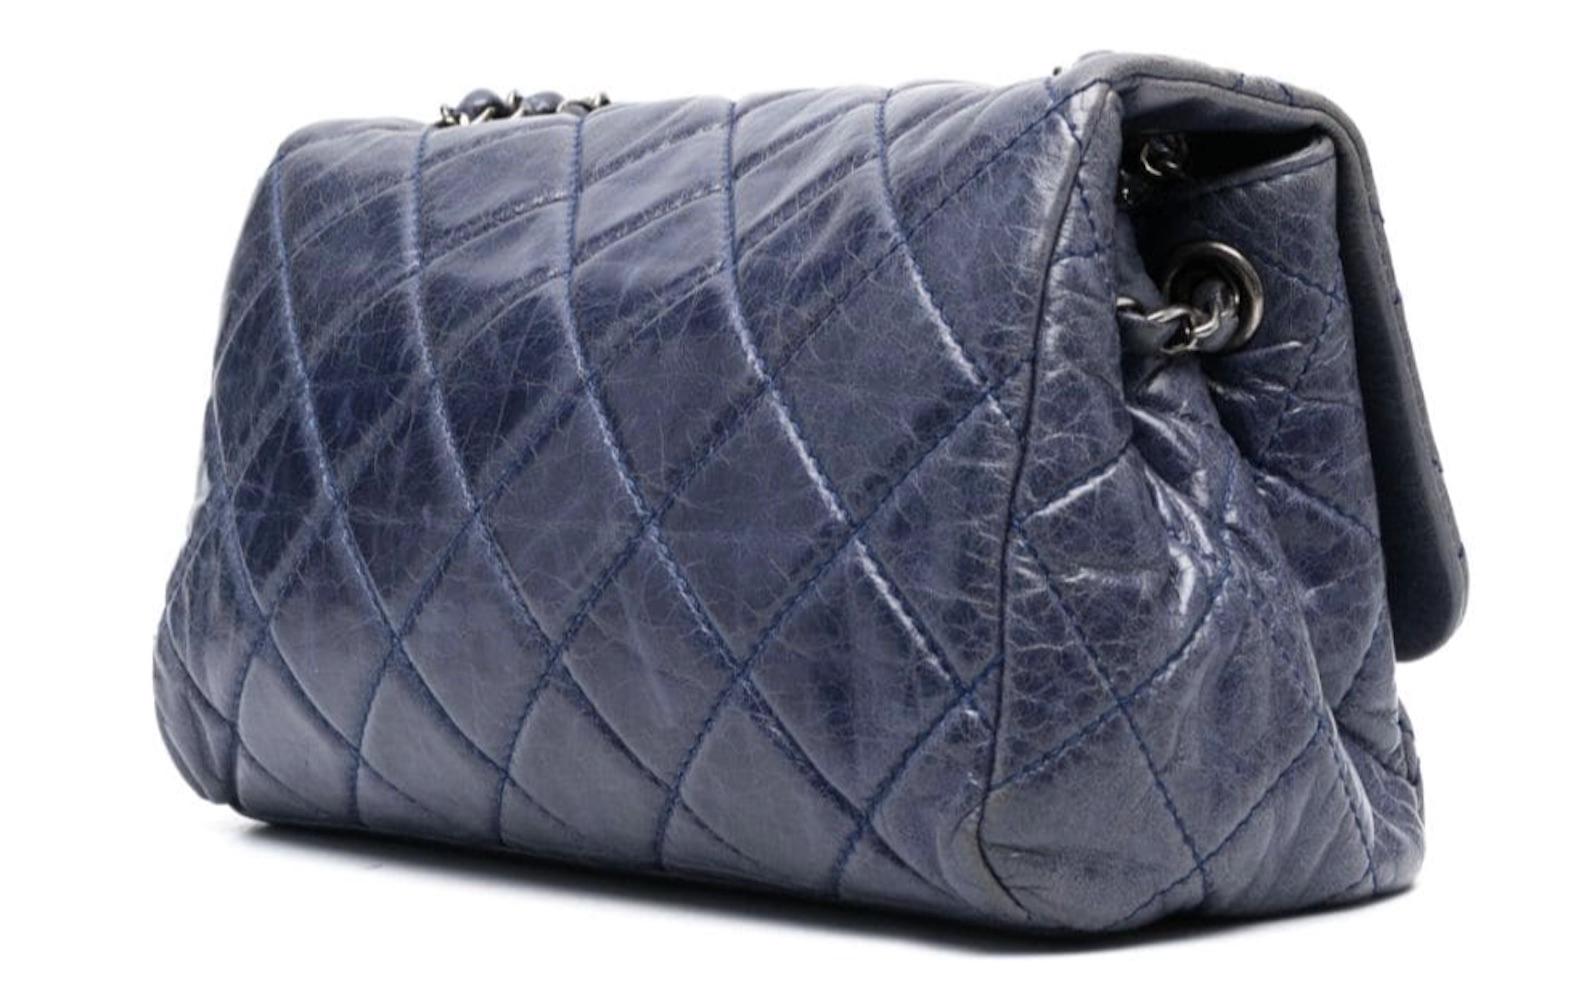 Chanel by Karl Lagerfeld blue jean lambskin quilted Timeless bag featuring a quilted pattern, blue jean tumbled quilted leather, silver-plated hardware with iconic 'CC' front closure, metal and leather interwoven shoulder and crossbody strap, red